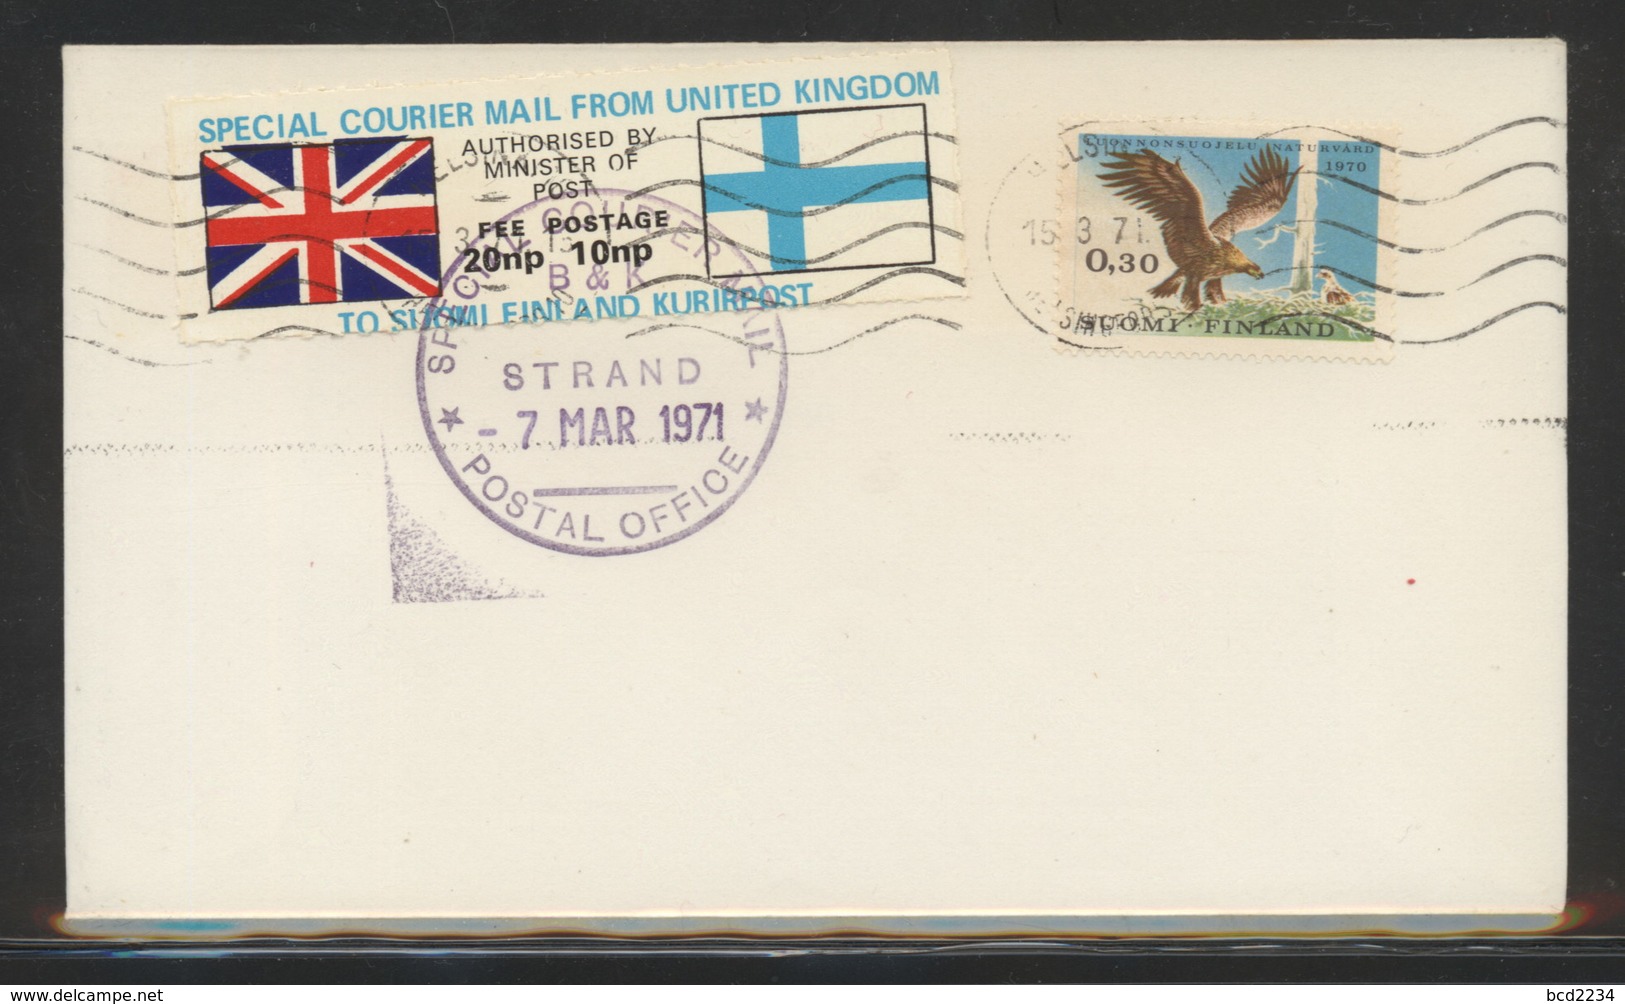 GREAT BRITAIN GB 1971 POSTAL STRIKE MAIL SPECIAL COURIER MAIL 2ND ISSUE DECIMAL COVER STRAND LONDON TO FINLAND 7 MARCH - Errors, Freaks & Oddities (EFO)